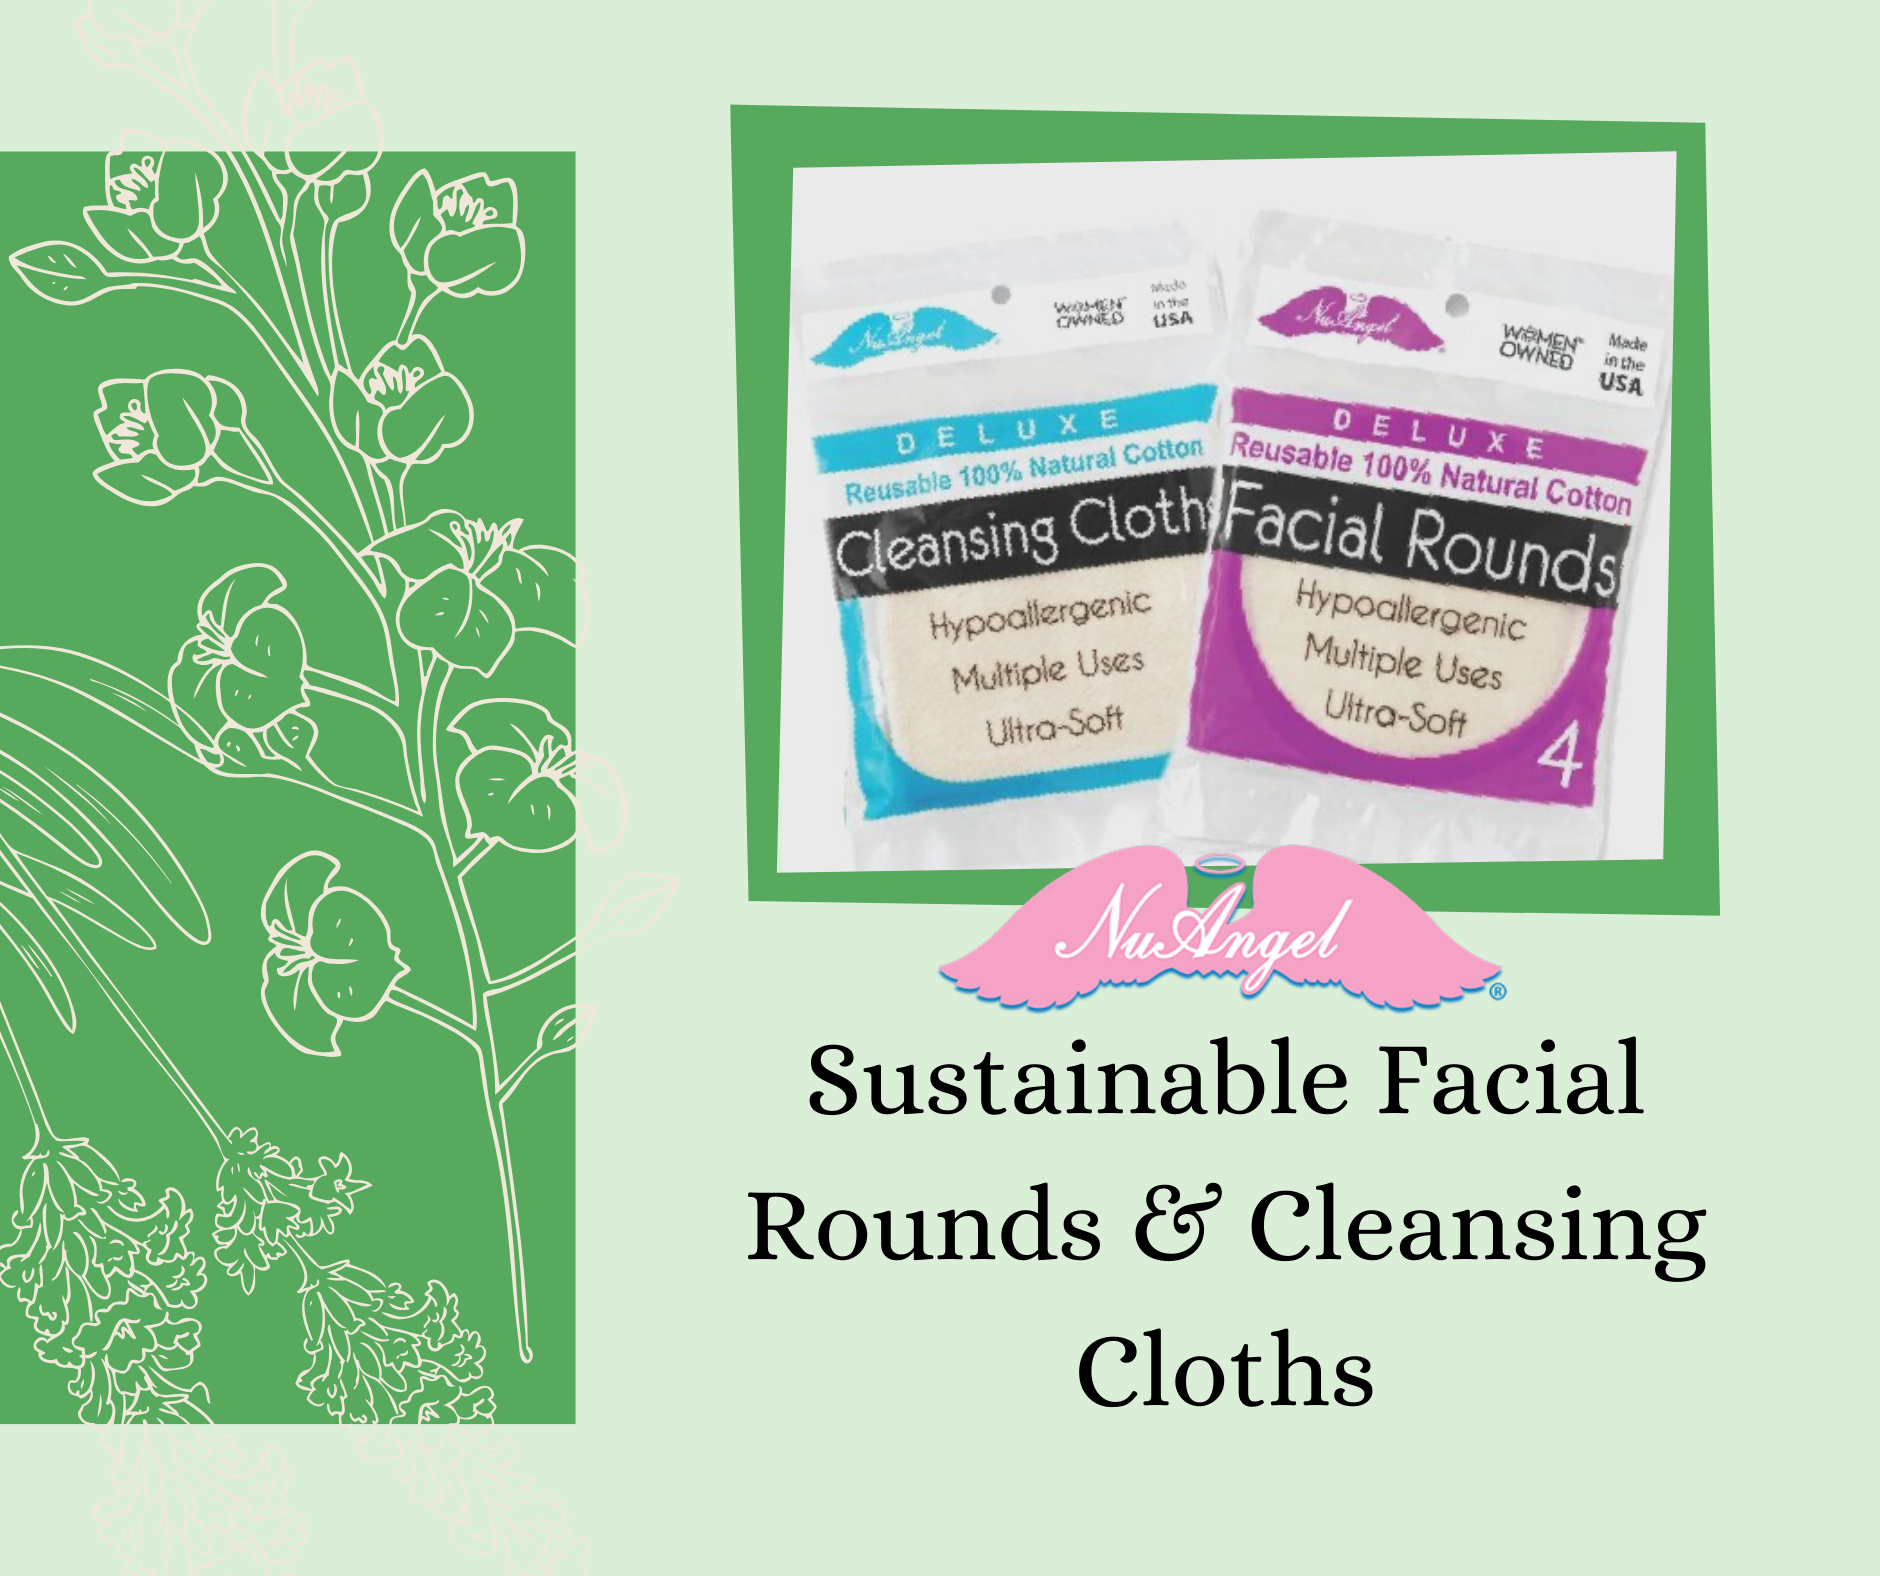 Sustainable Facial Rounds and Cleansing Cloths